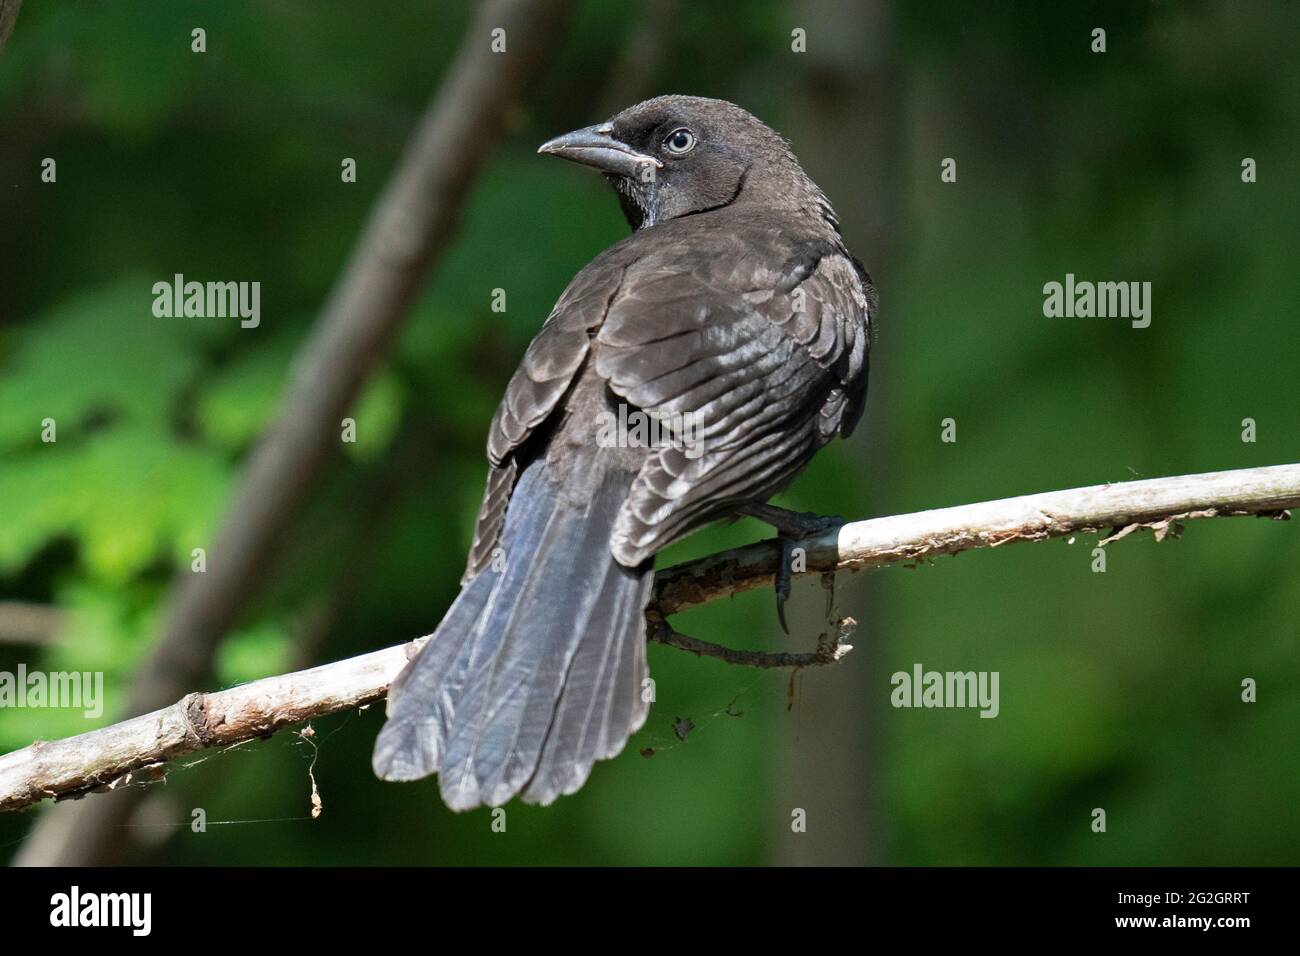 Juvenile Common Grackle (Quiscalus Quiscula), Young Immature Bird Stock Photo